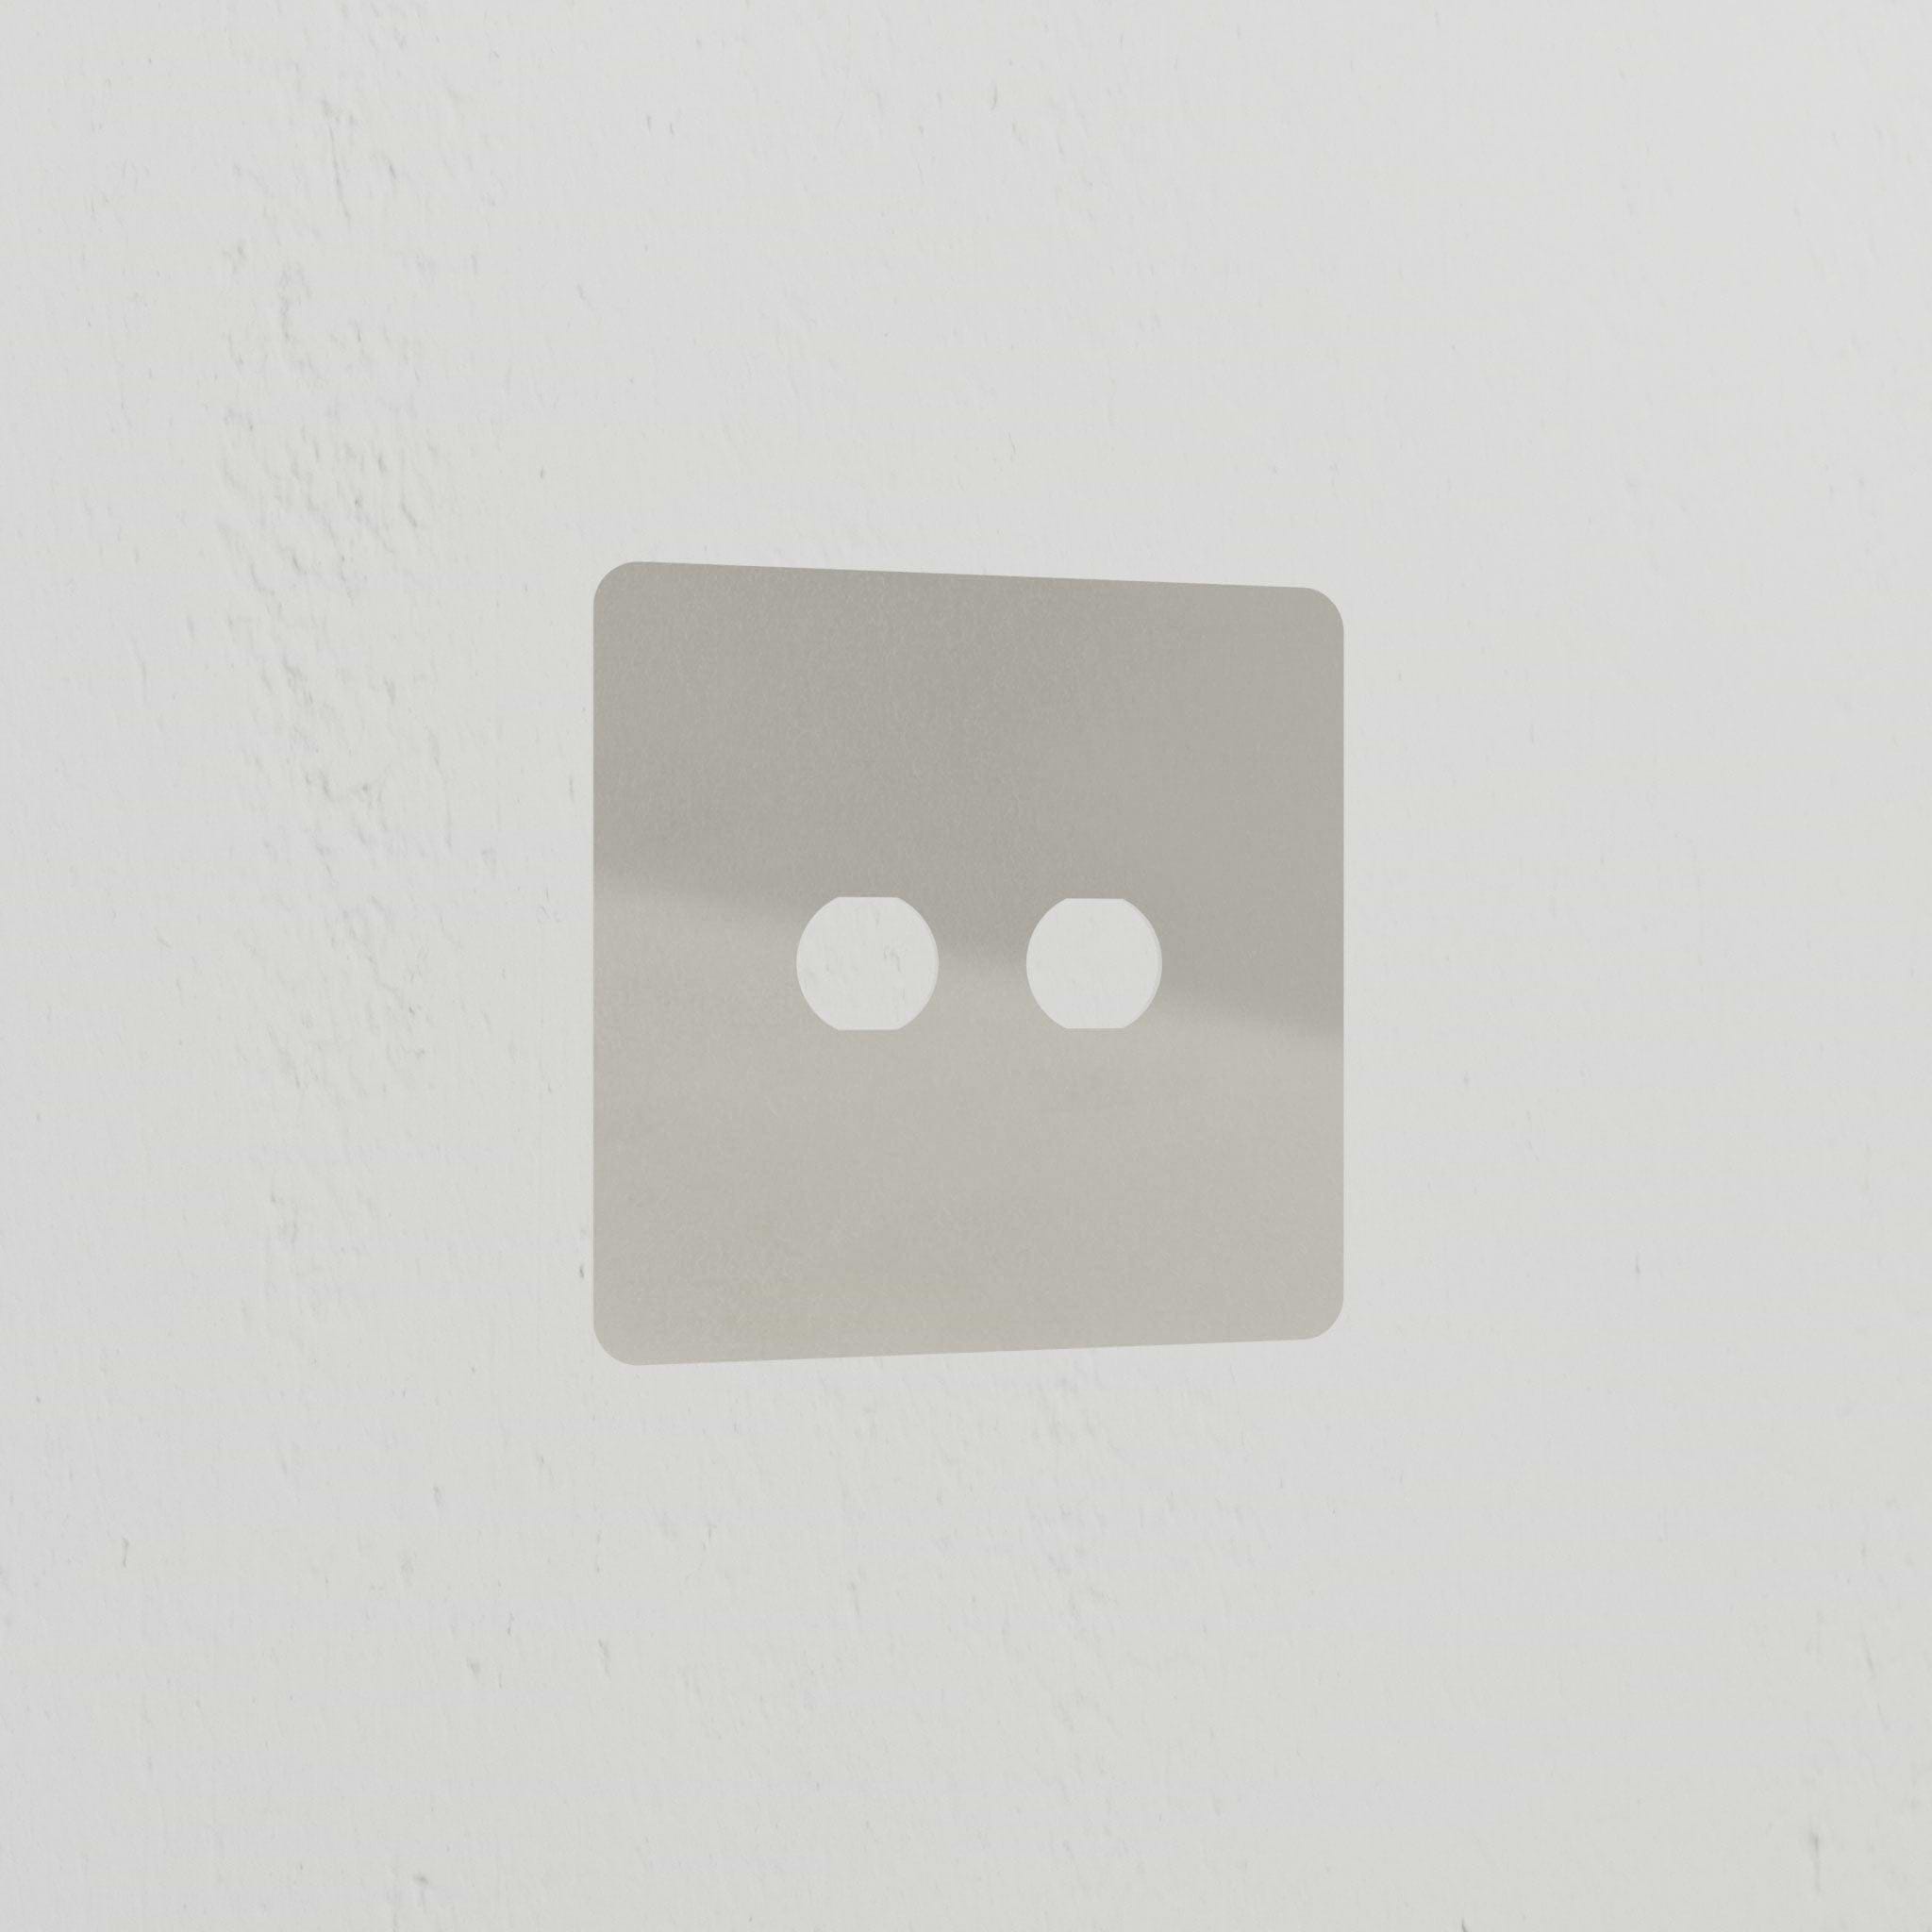 2G Switch Plate - Polished Nickel